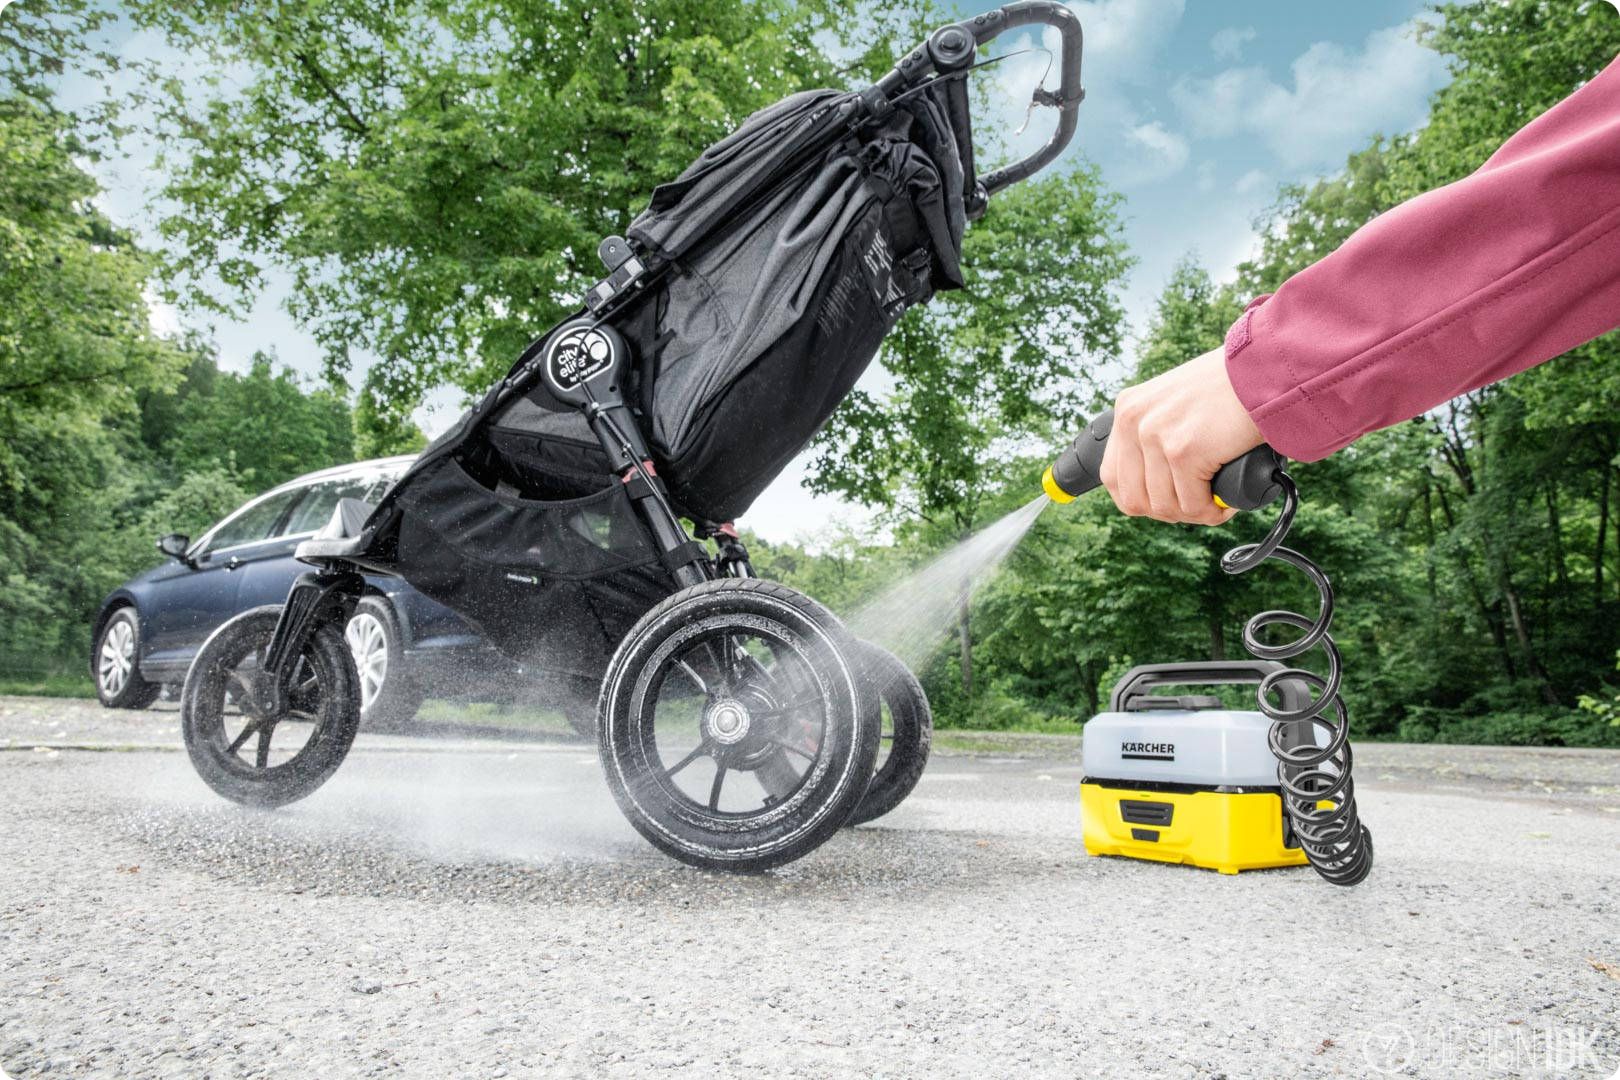 Stroller Maintenance Tips: Extending the Lifespan of Your Baby's Ride